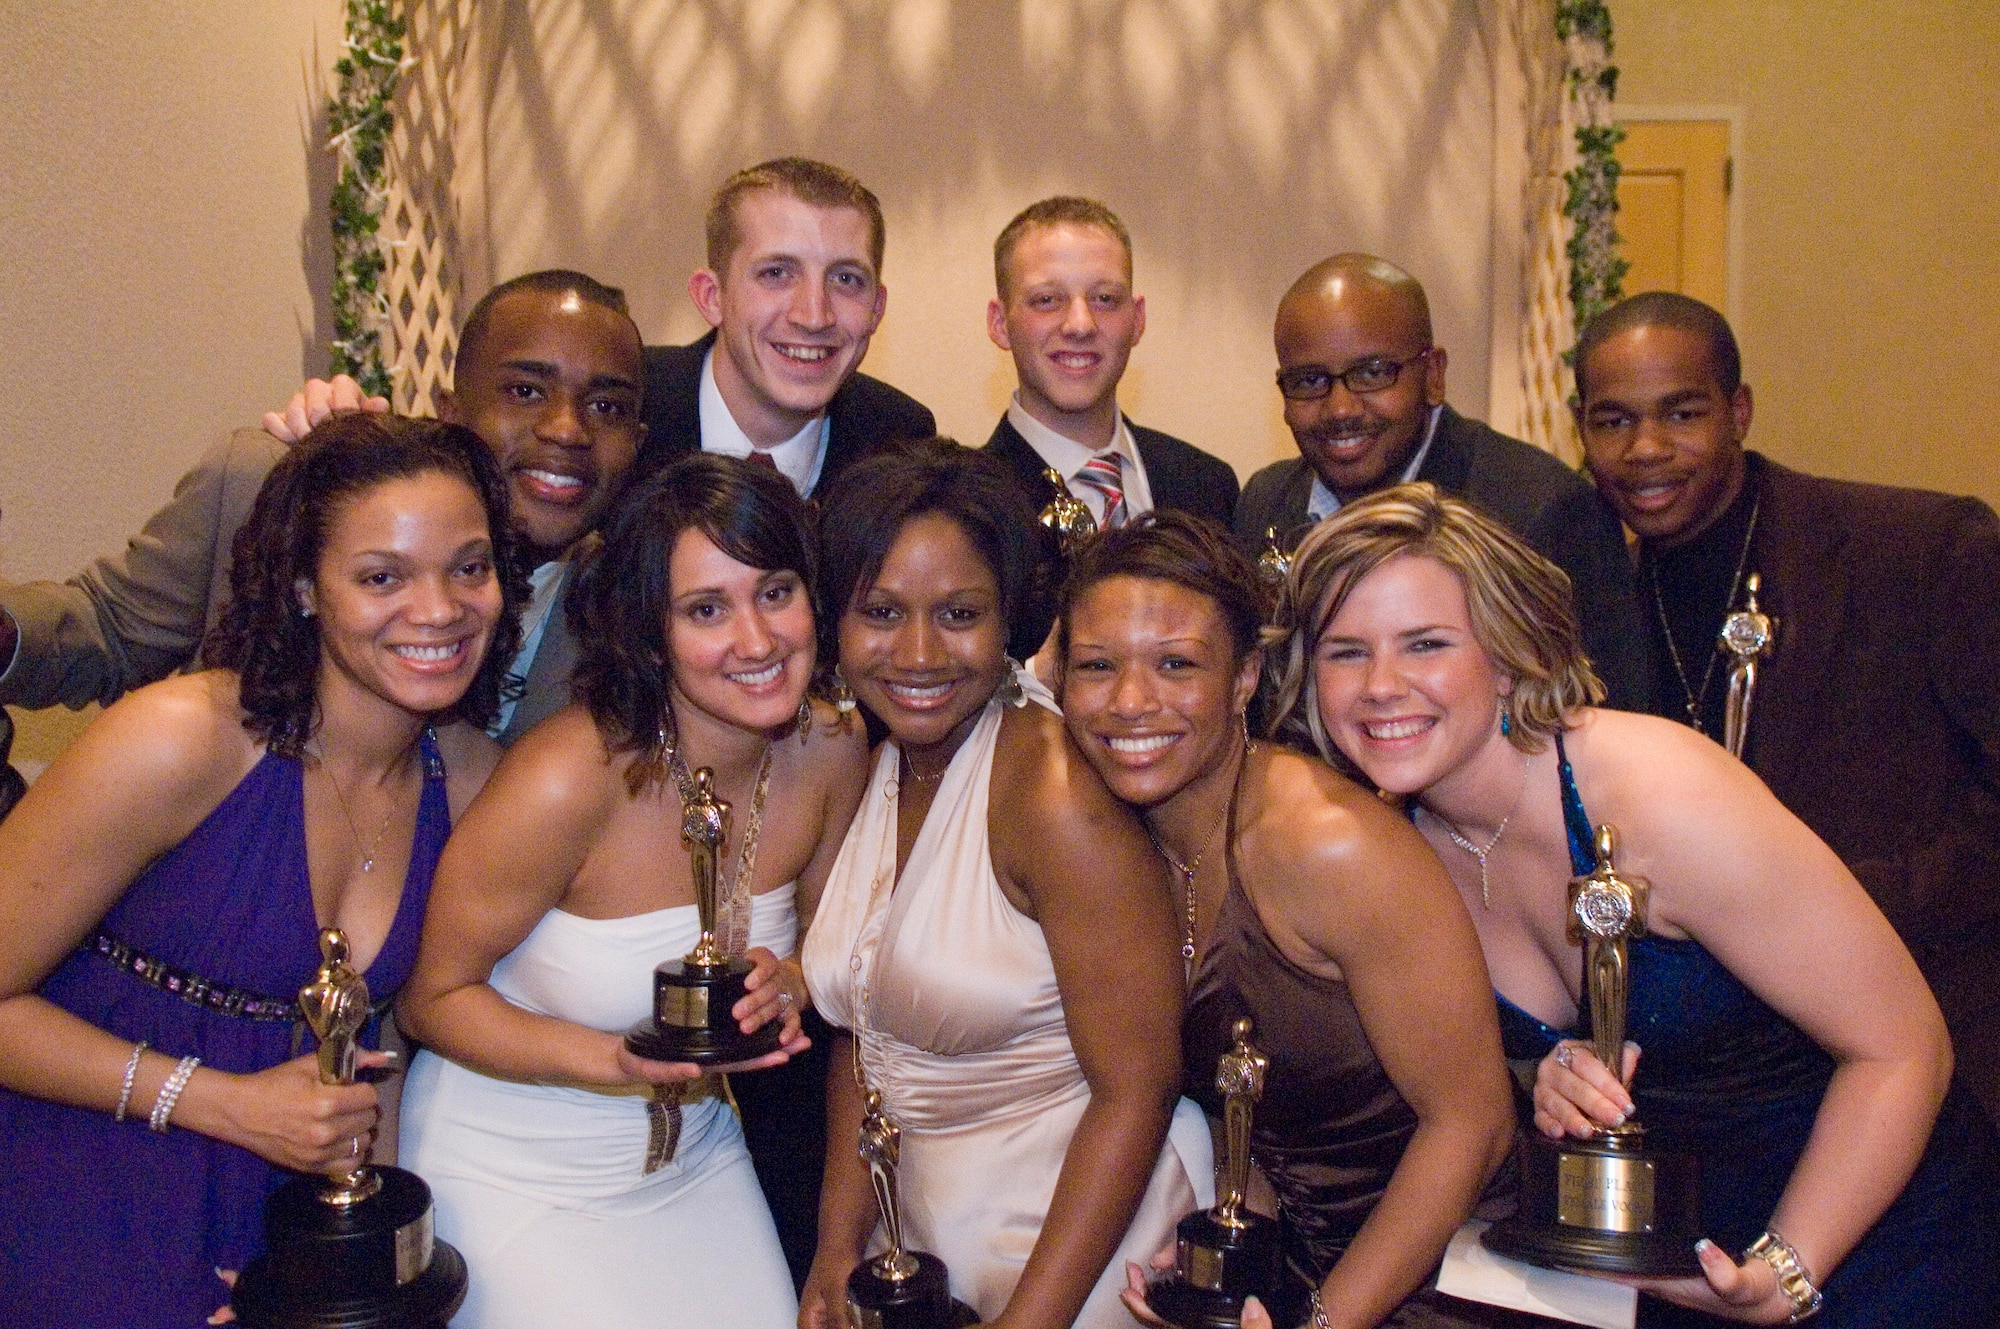 The winners of the Air Force Tops in Blue Worldwide Talent  competition was (left to right) Corey Sims, male vocalist; Brian Carmack, male vocalist; David Butler, specialty; Henry Roberson, instrumental bass; Chris Gadson, instrumental drums; Tyrona Pearsal, dance; Chandra Smith, female vocalist; Alice Lewis, female vocalist; Courtney Wallace, dance; and Ashley Montgomery, female vocalist. The banquet was at the collocated club on Lackland Air Force Base, Texas, Dec. 10.  (U.S. Air Force photo/Tech. Sgt. Cecilio Ricardo) 